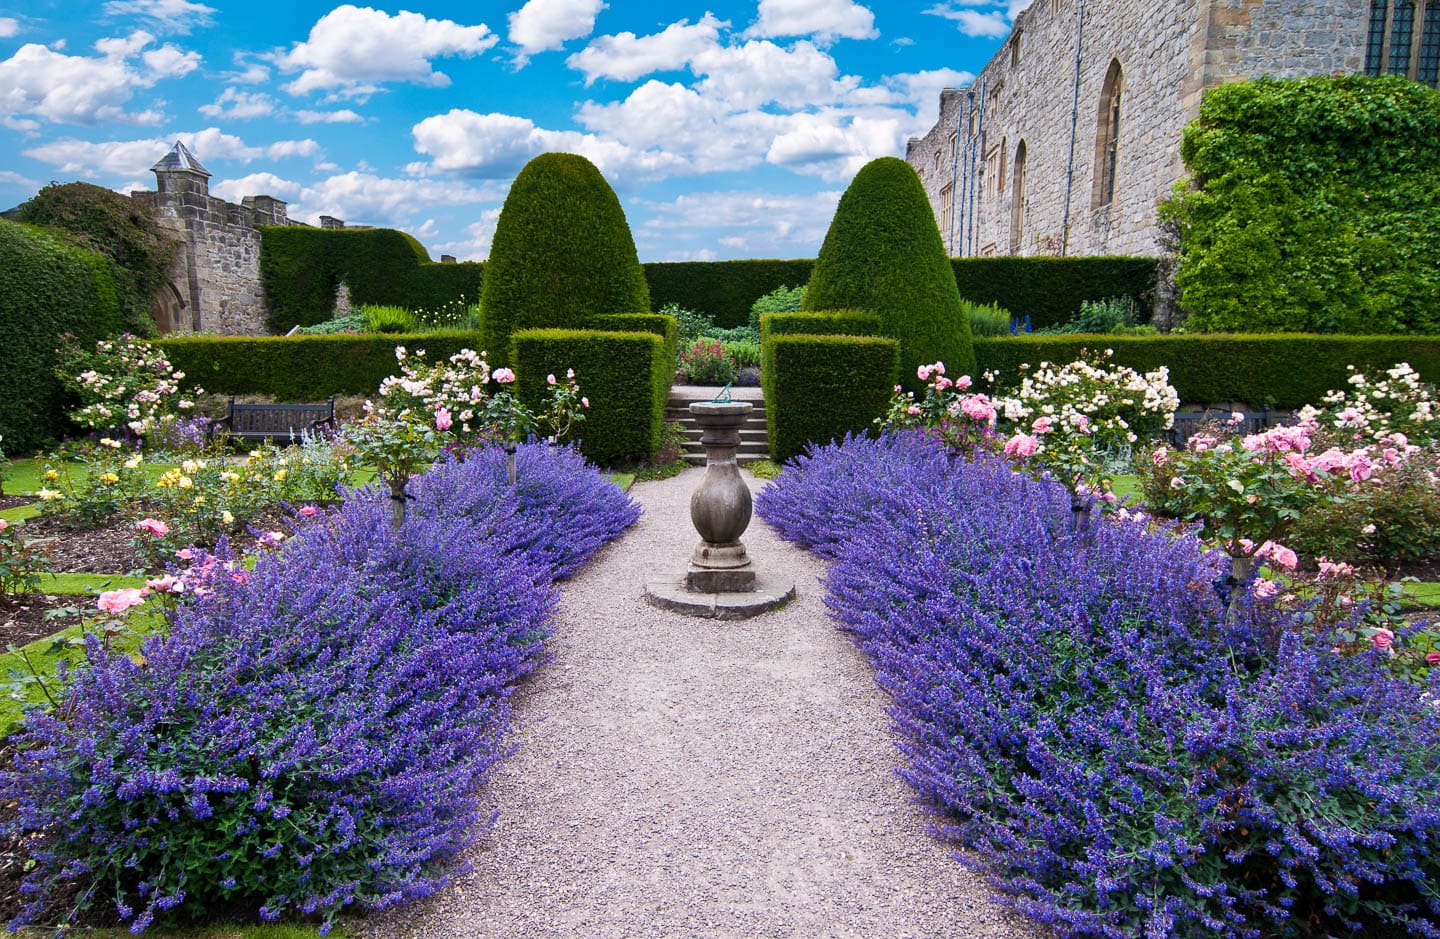 A formal garden with blue lavender on either side of a gravel path with a sundial in the middle